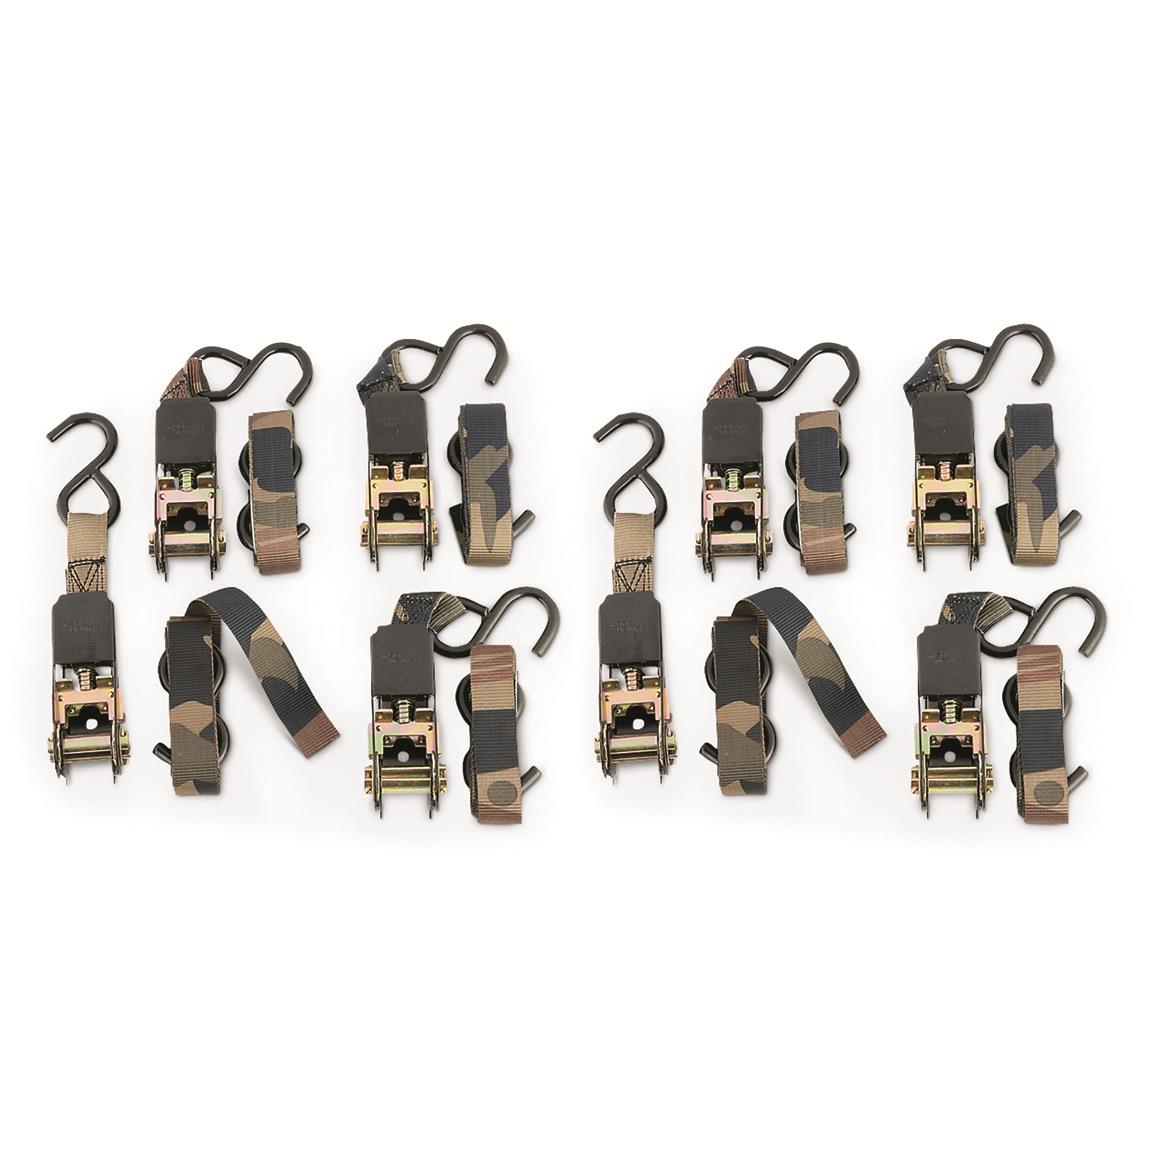 Guide Gear 8' Ratchet Straps, 8 Pack